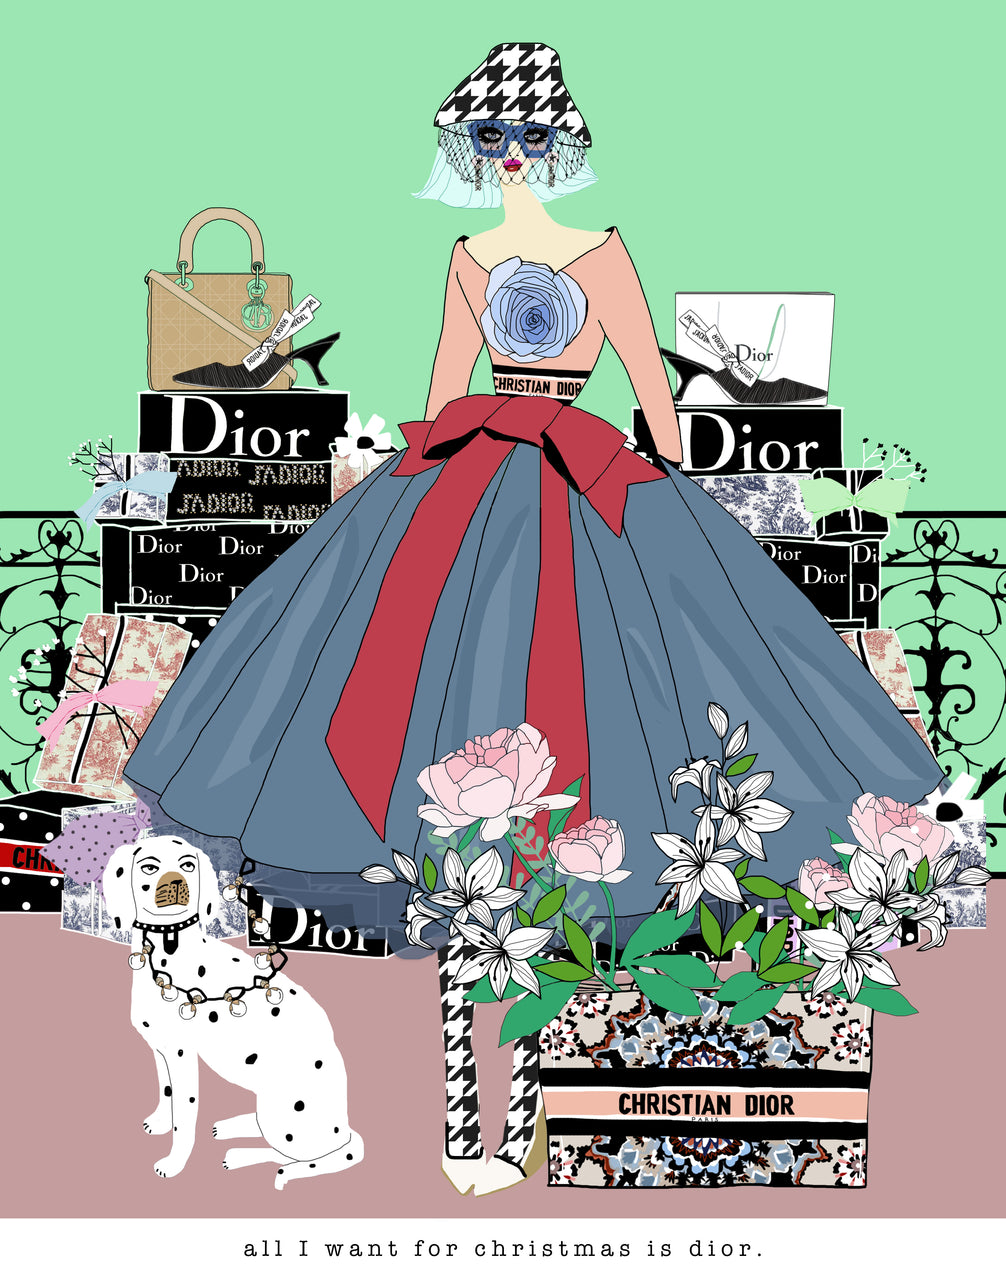 All I Want For Christmas is Dior